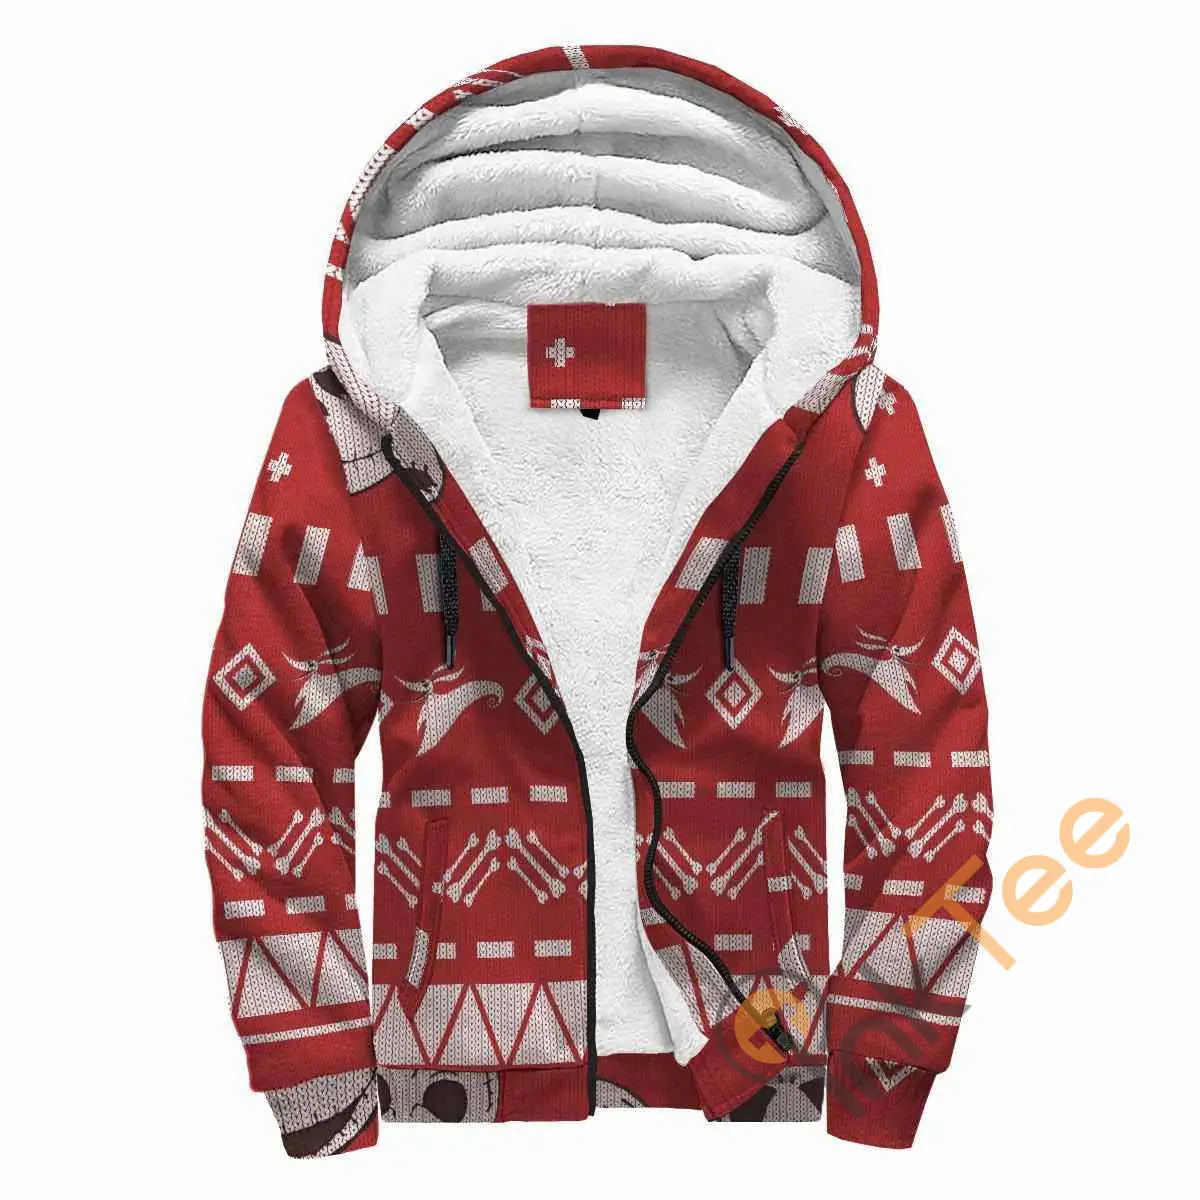 Nightmare Before Christmas Patterned Jack Ugly Christmas Sweater Red Fleece Zipper